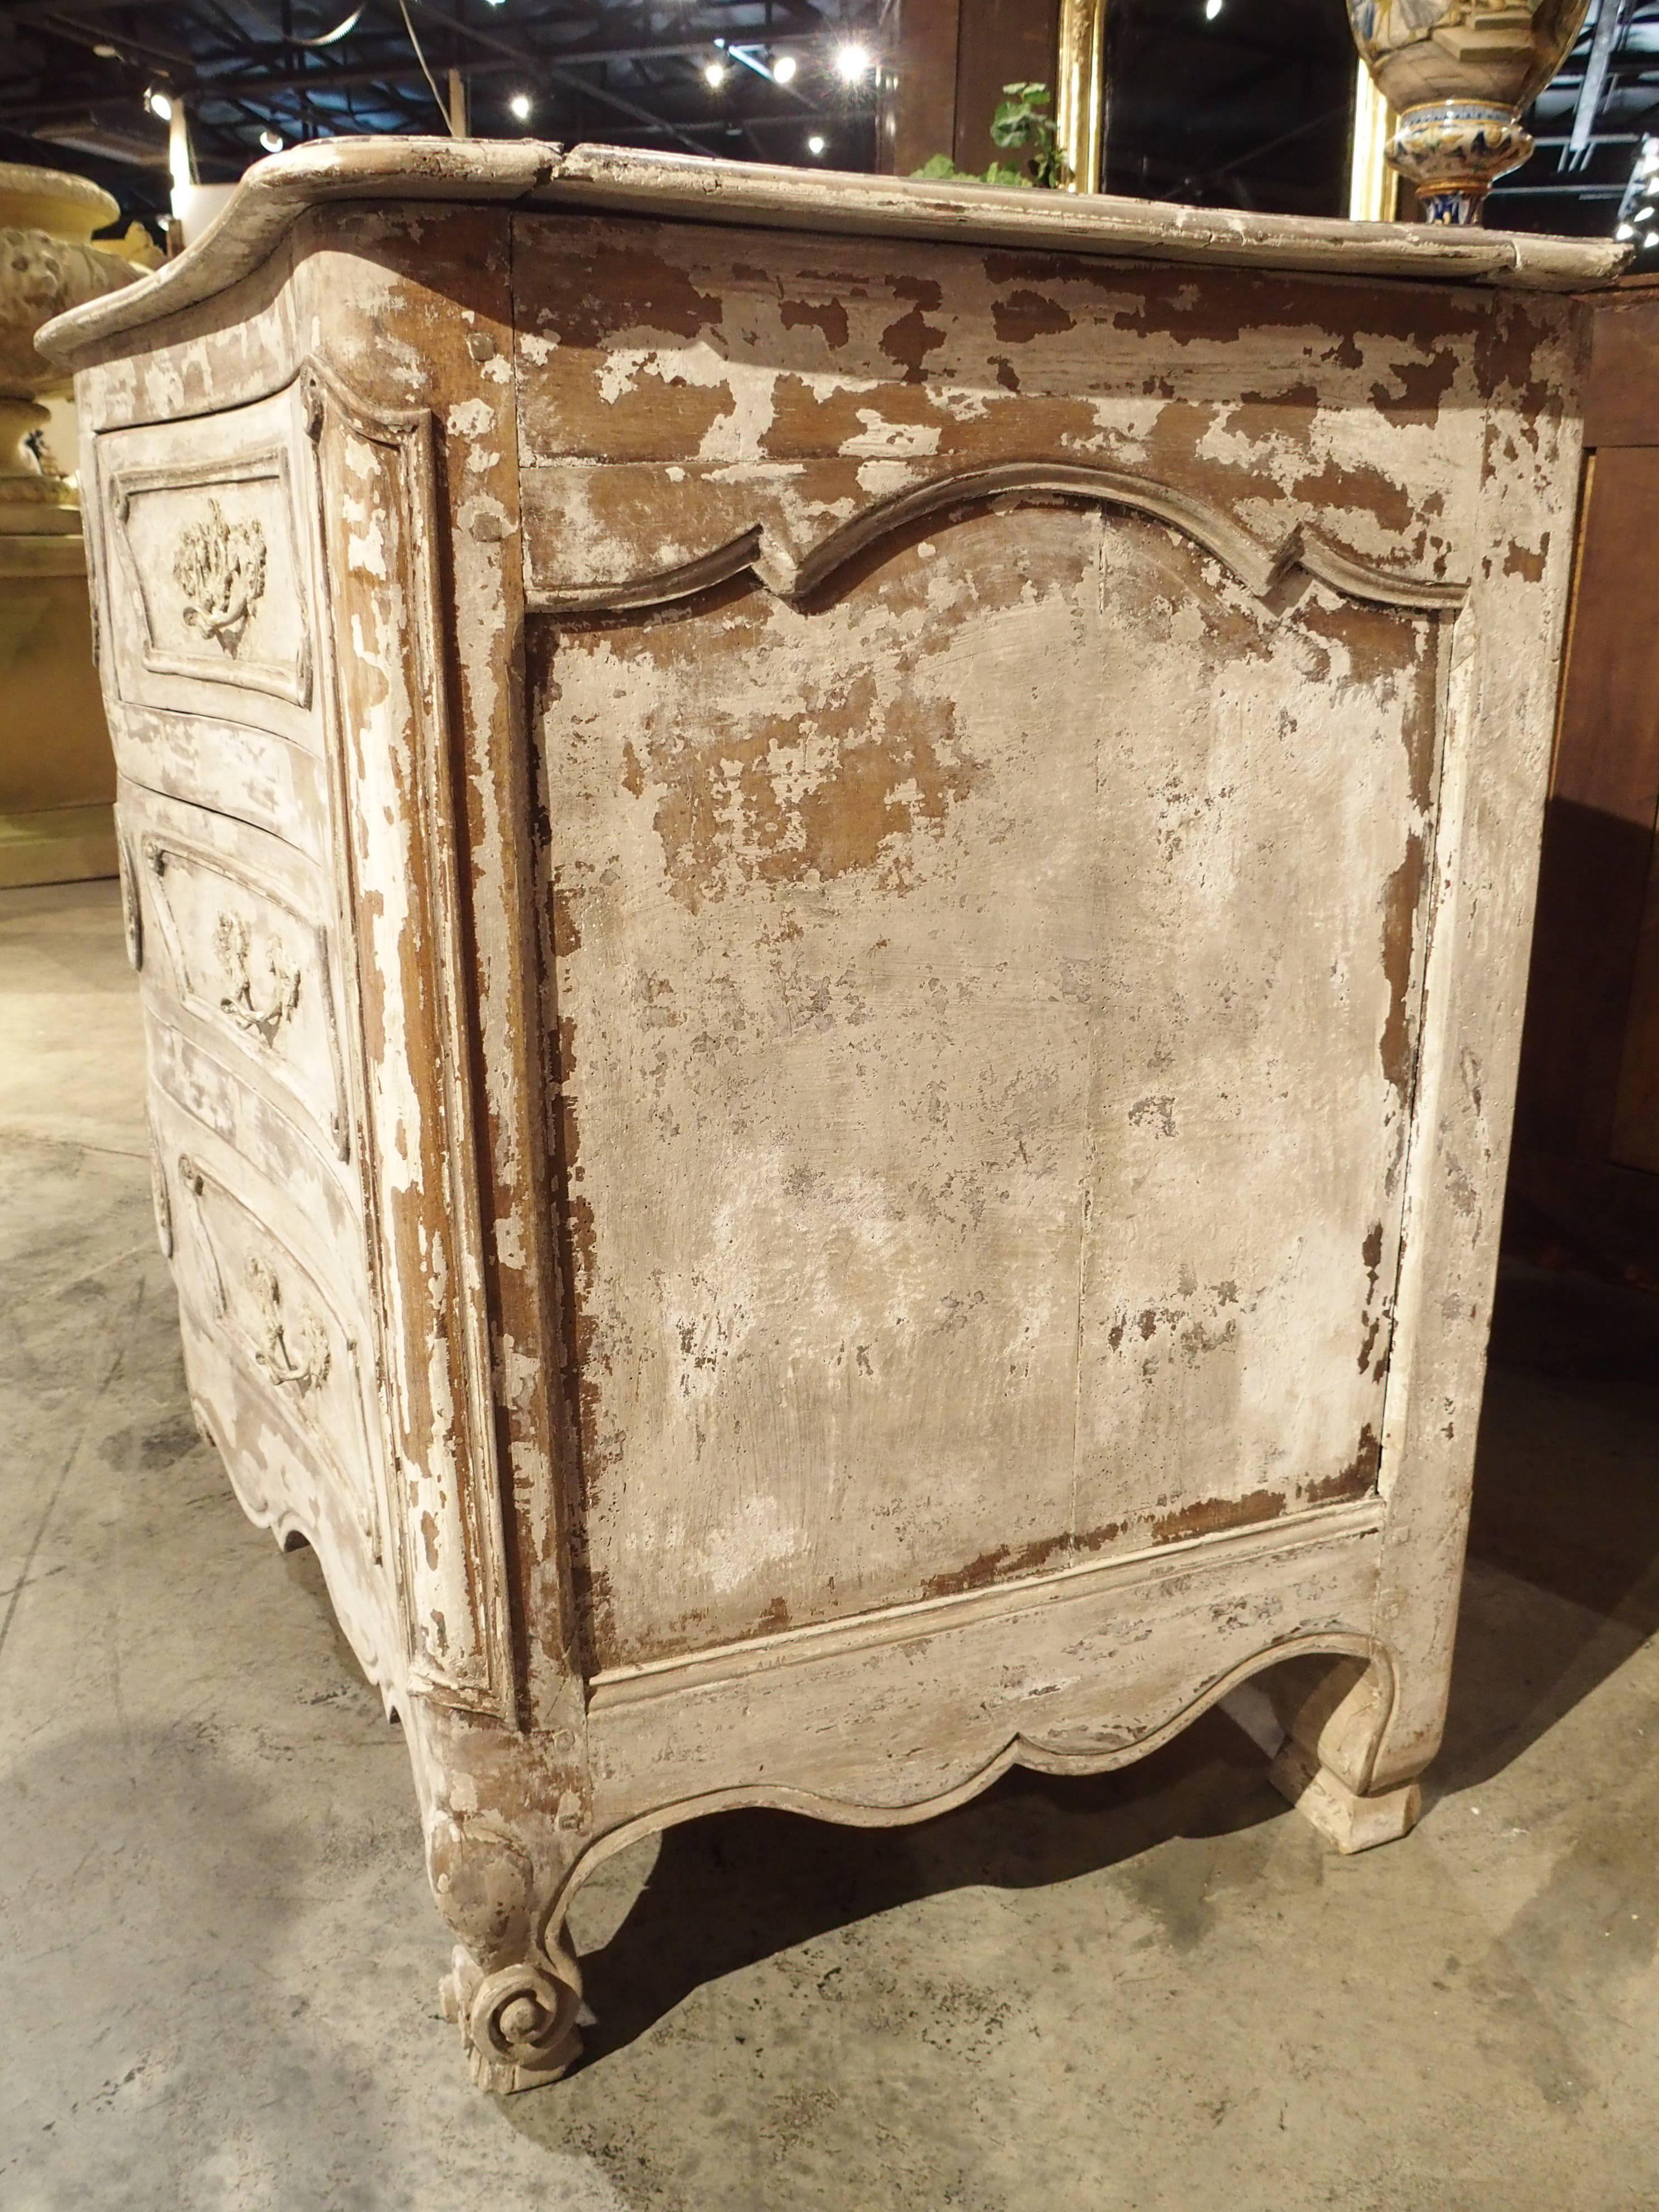 This wonderful Louis XV style painted commode from France dates to the 1700s. Made from walnut wood, it was re-finished/painted sometime in the 1900s. 

It has a rectangular conforming wooden top and a restrained shaped front over a recessed,